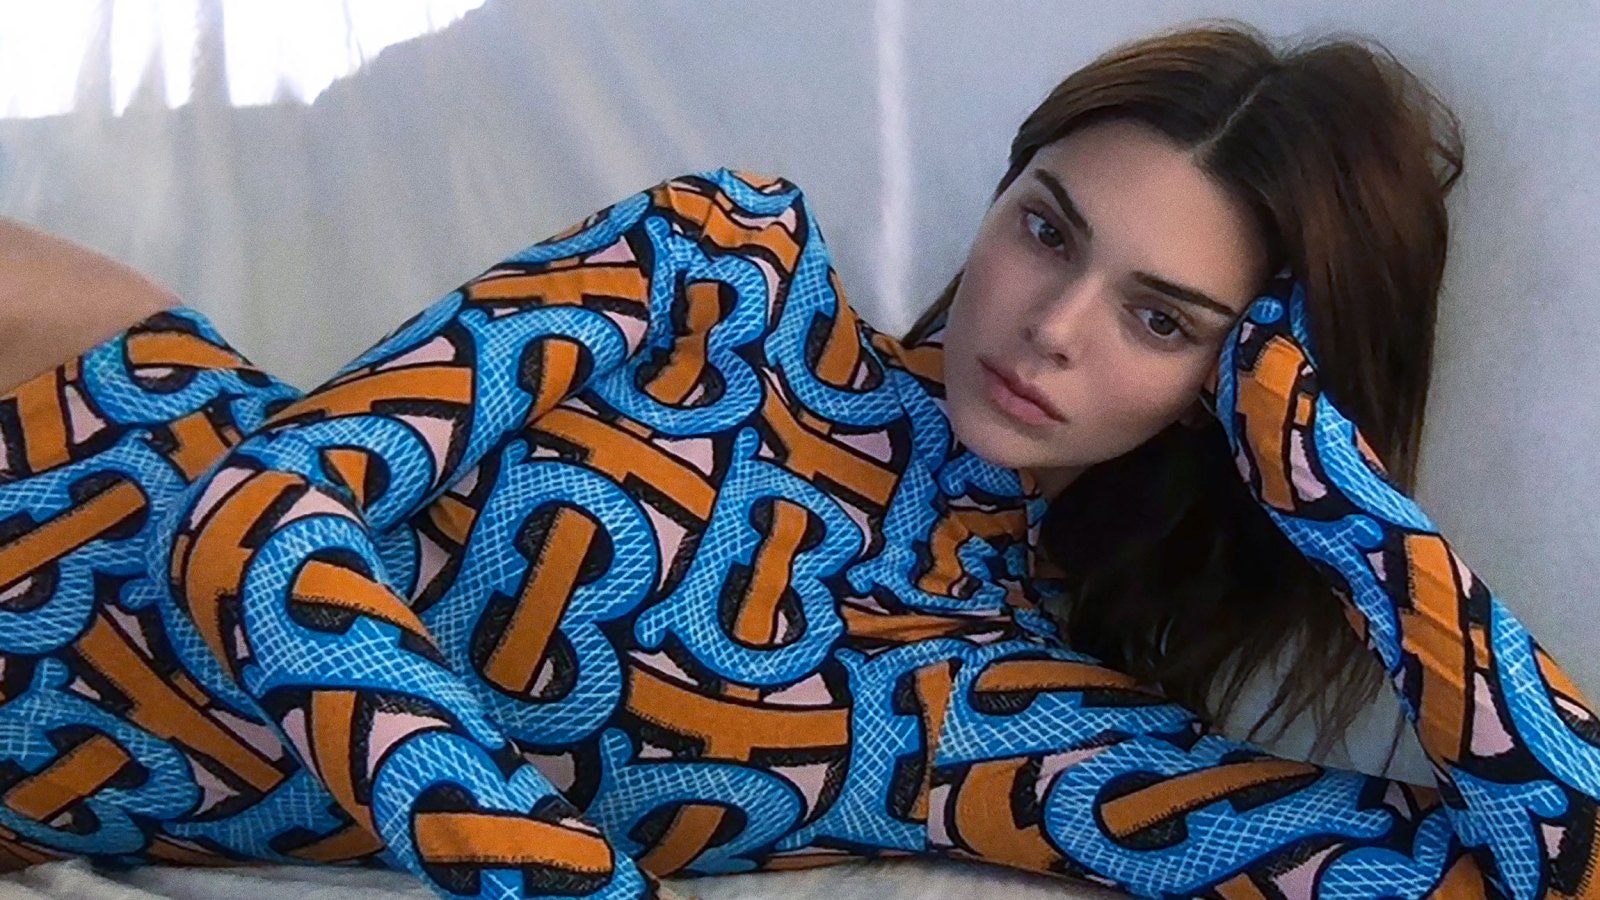 Kendall Jenner Makes the Case for the Louis Vuitton Monogrammed